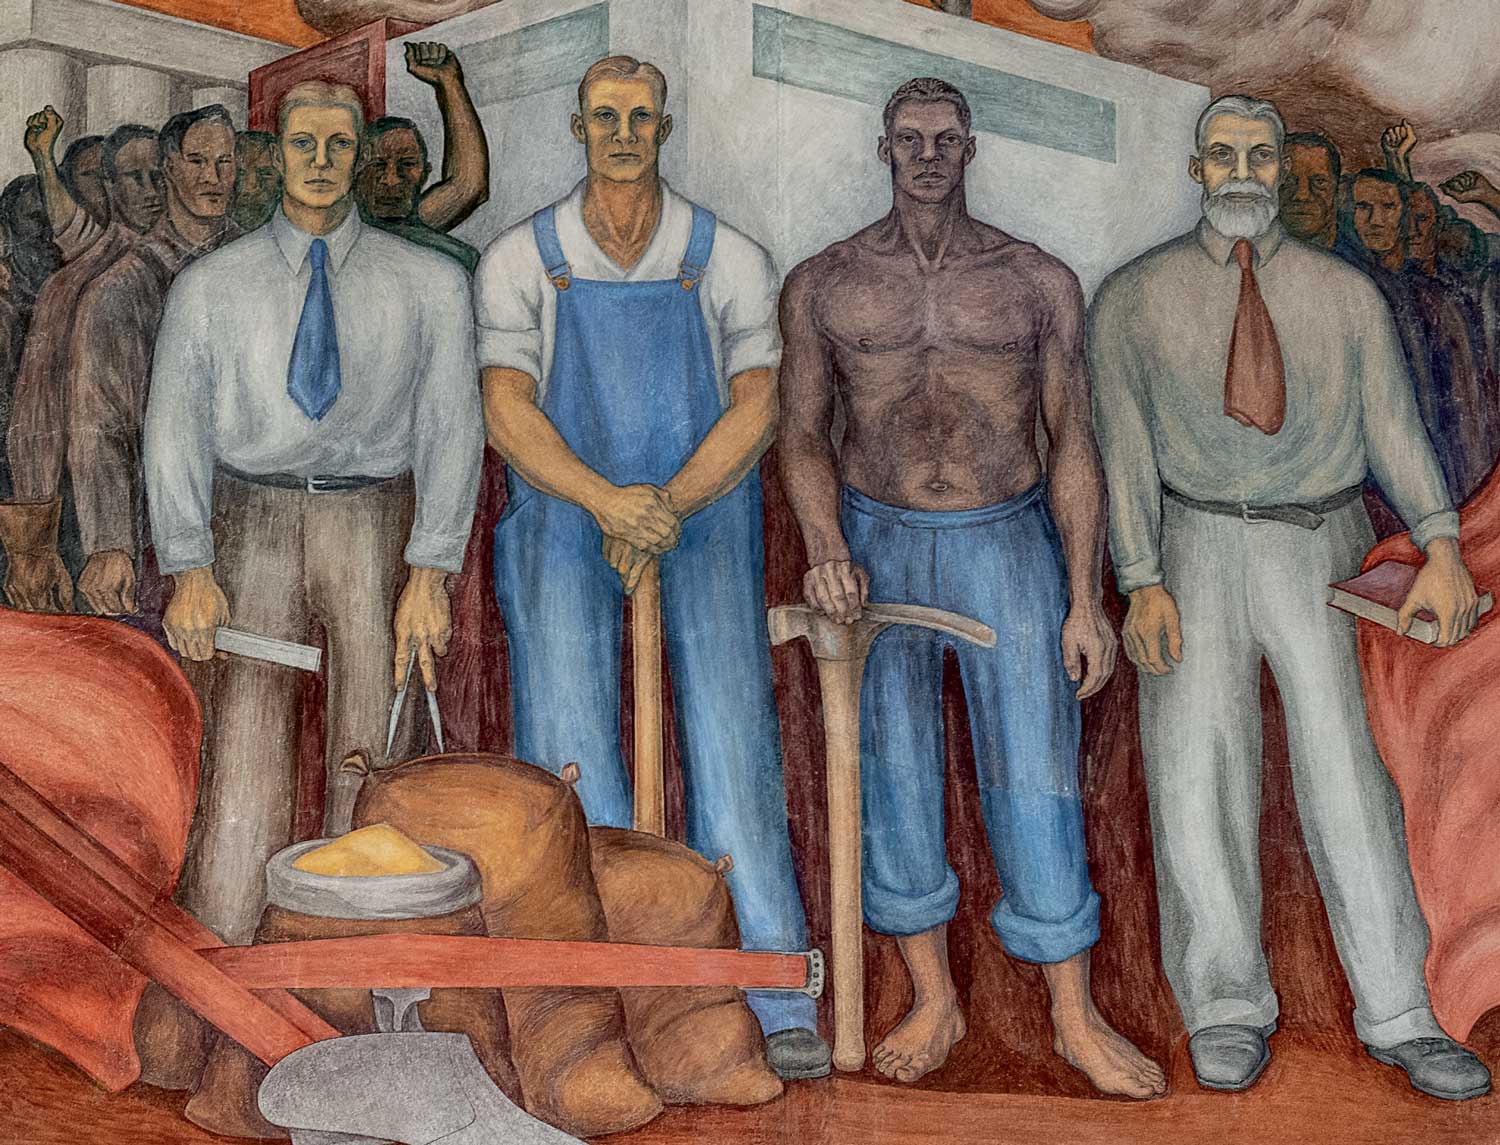 Fresco, men standing, holding implements of science and engineering